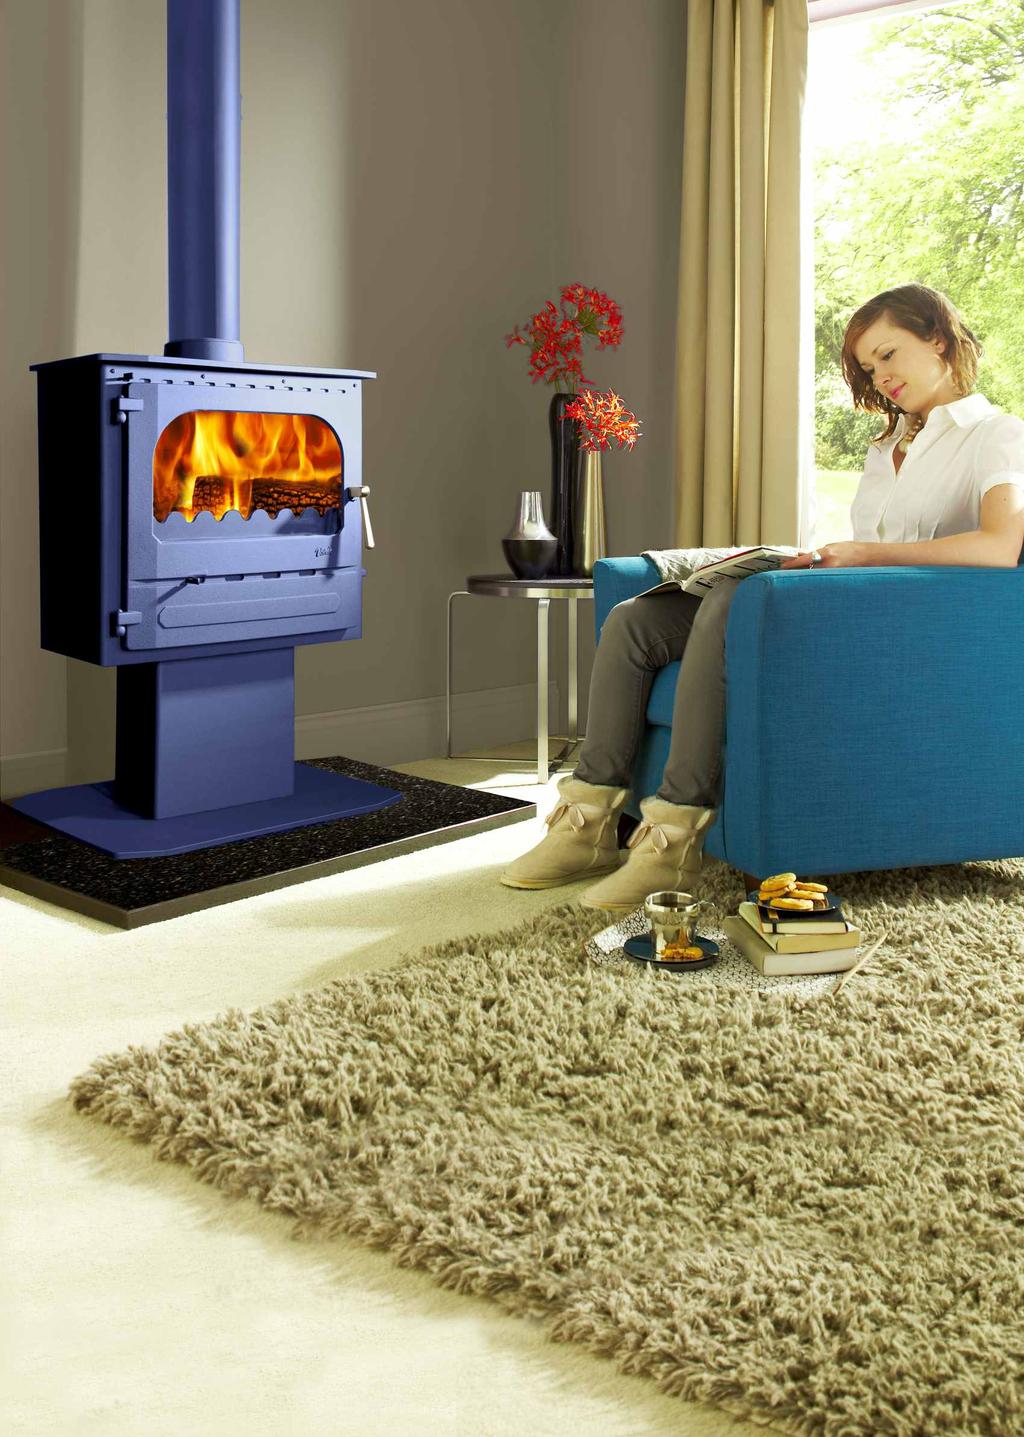 The Highlander 5 Enviroburn Solo Slimline Pedestal (with Blue Metallic Paint Finish see page 16 for more info on colours) has been designed to be the freestanding focal point of your home.